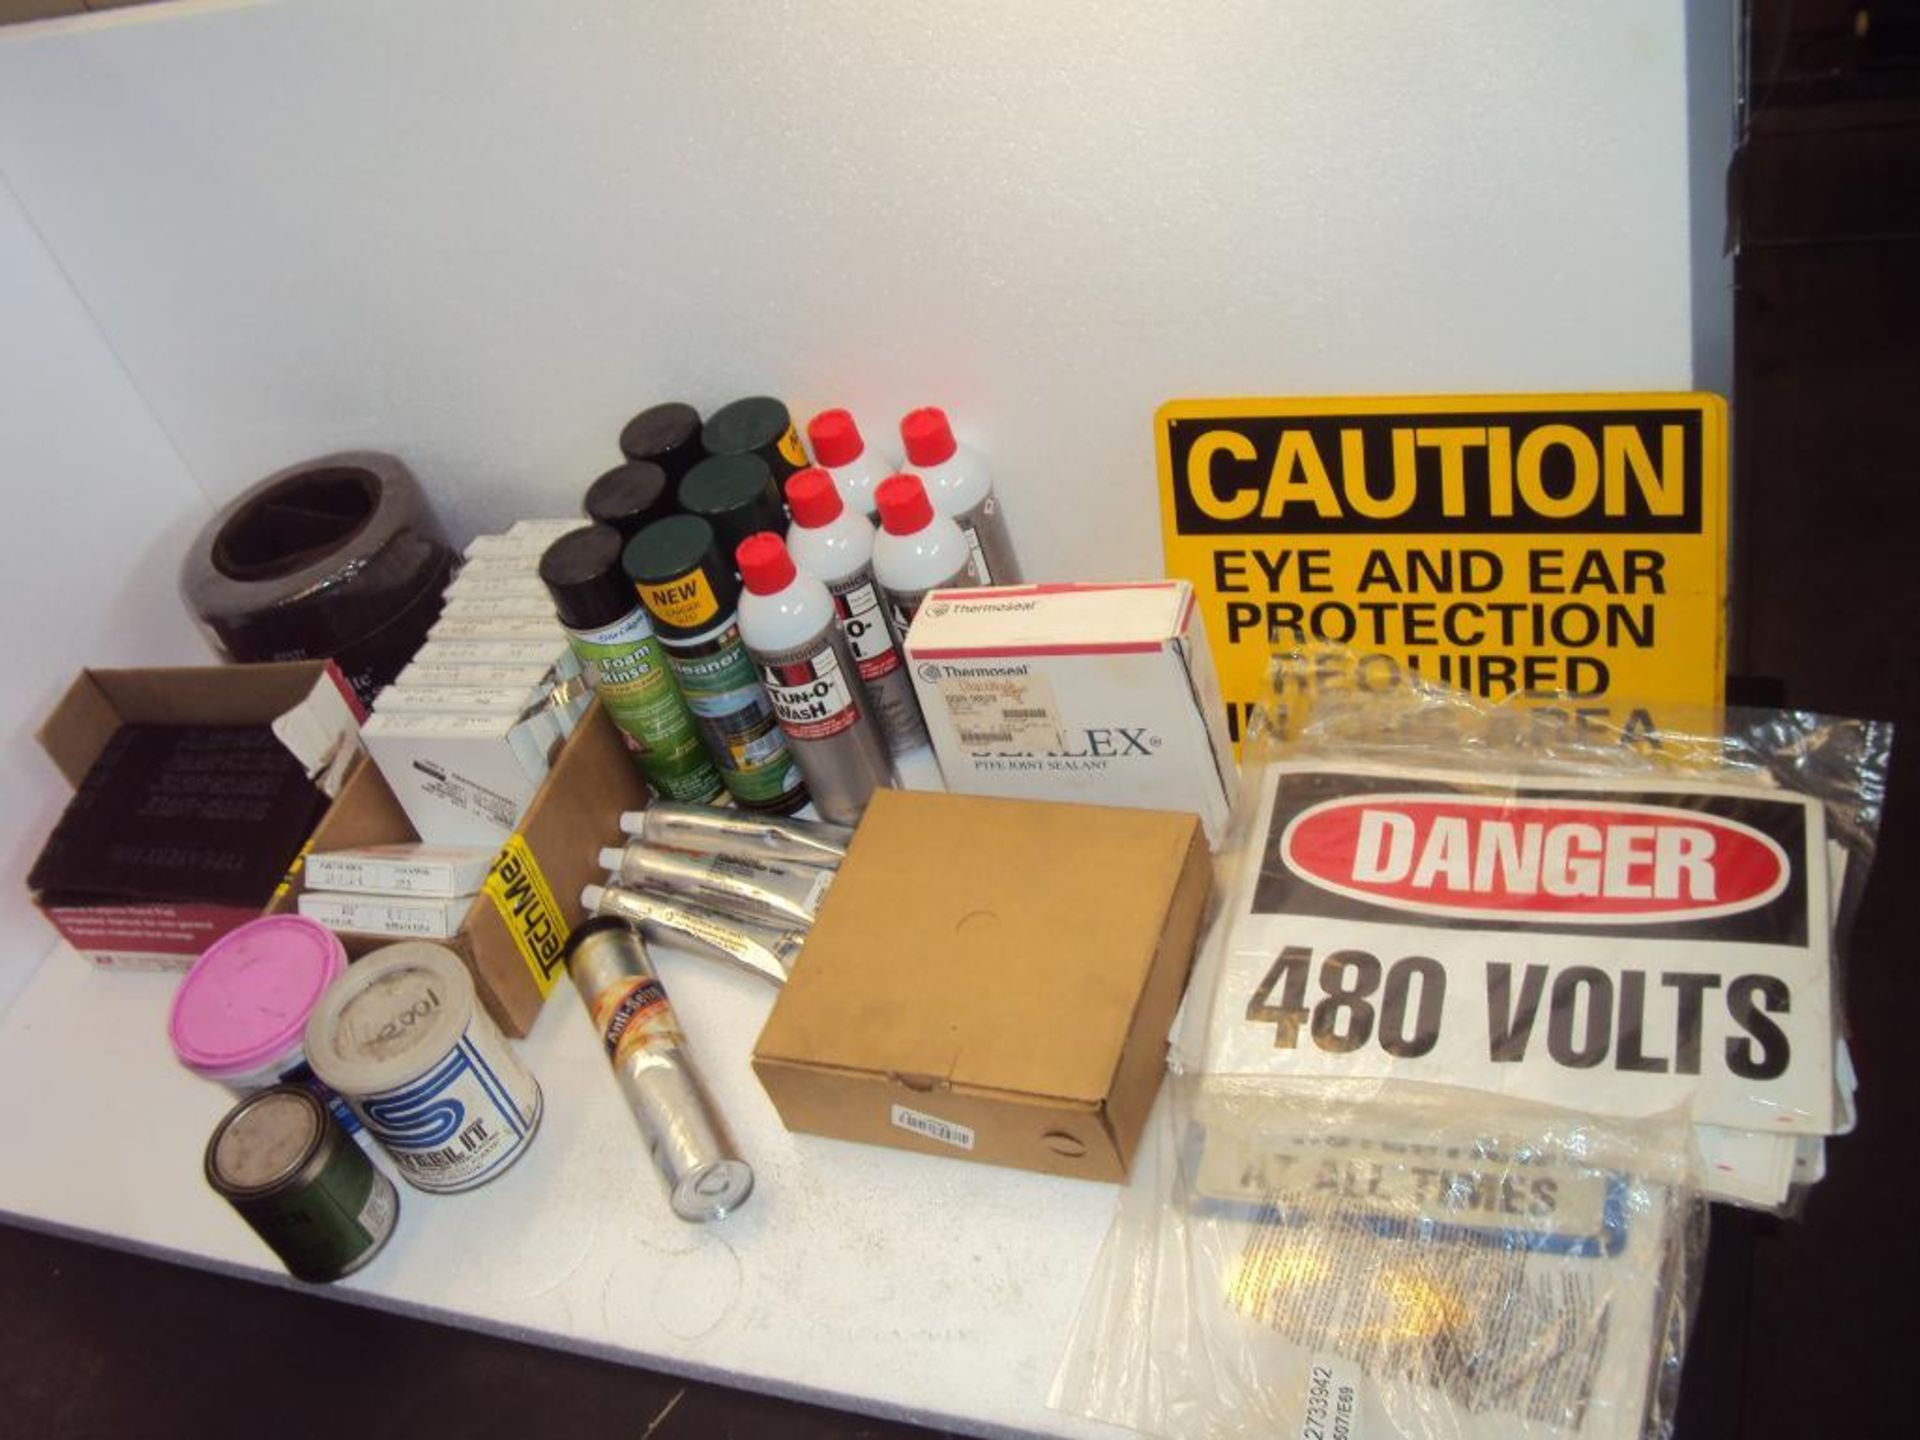 Shop Supplies Signs, cleaners, shim stock and lubricants